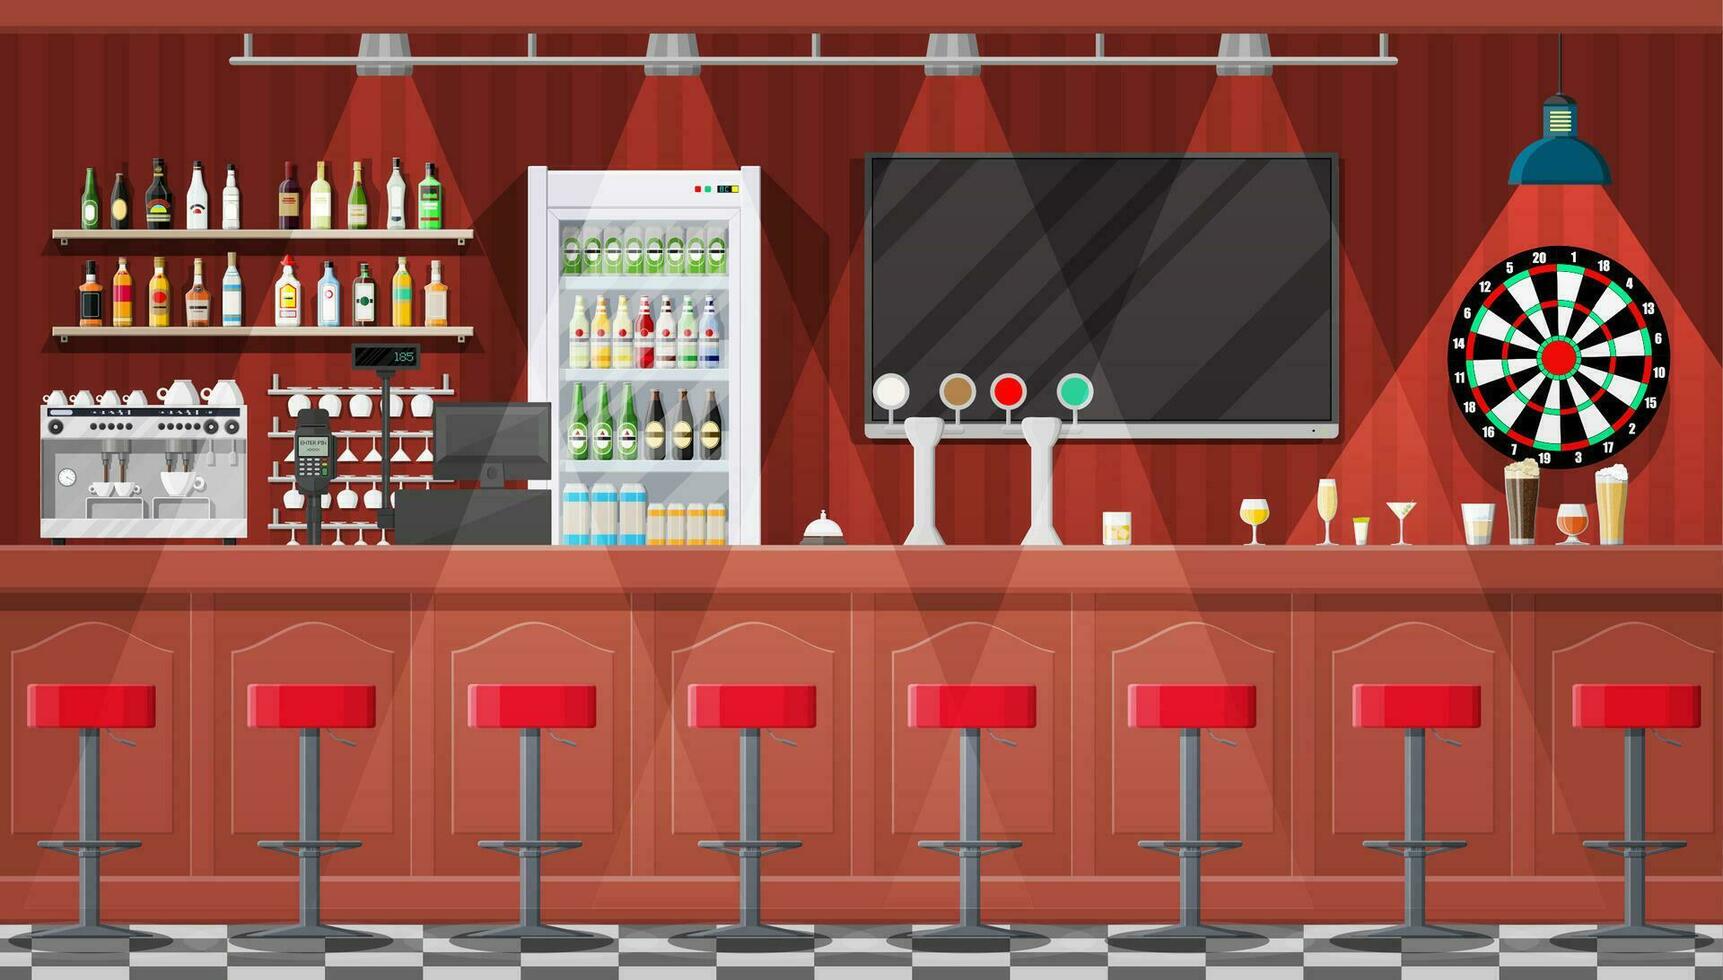 Drinking establishment. Interior of pub, cafe or bar. Bar counter, chairs and shelves with alcohol bottles. Glasses, tv, dart, fridge and lamp. Wooden decor. Vector illustration in flat style.